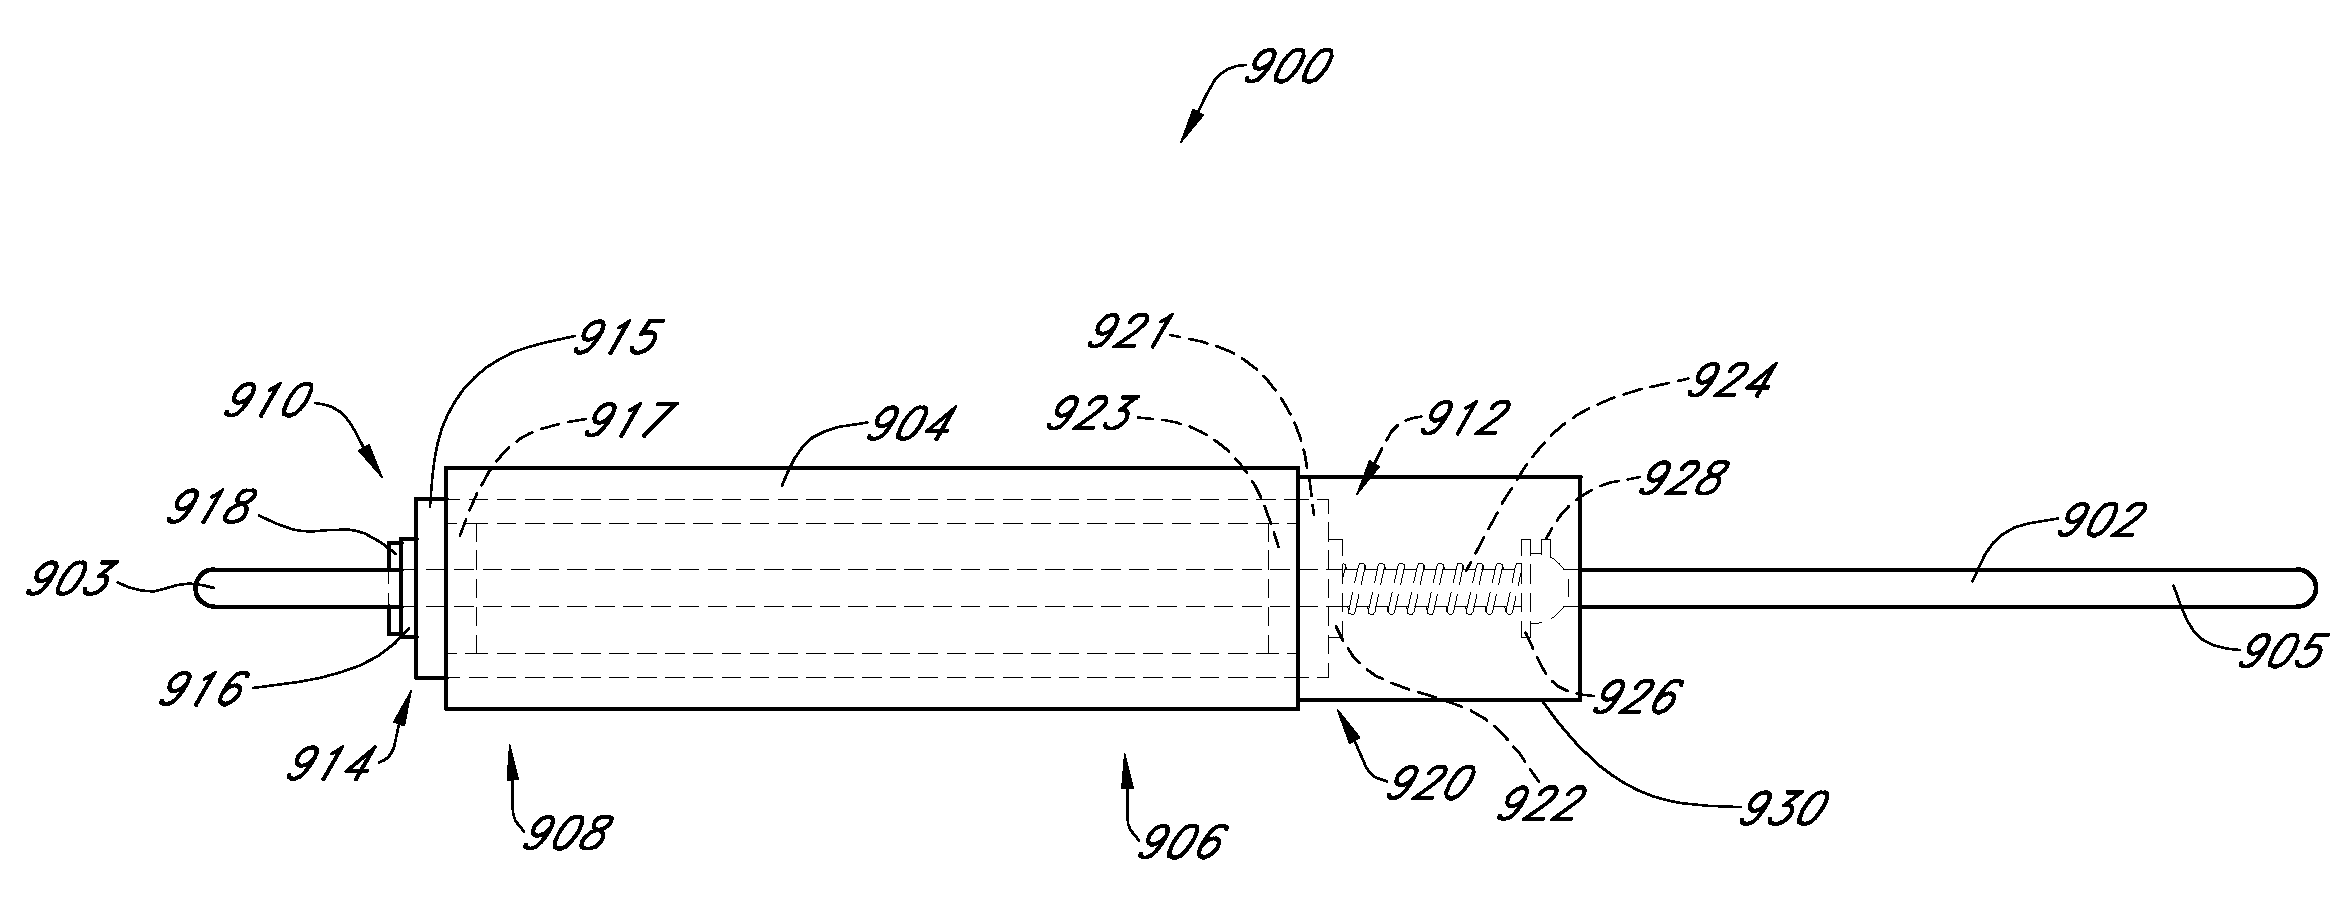 Wrapping apparatus